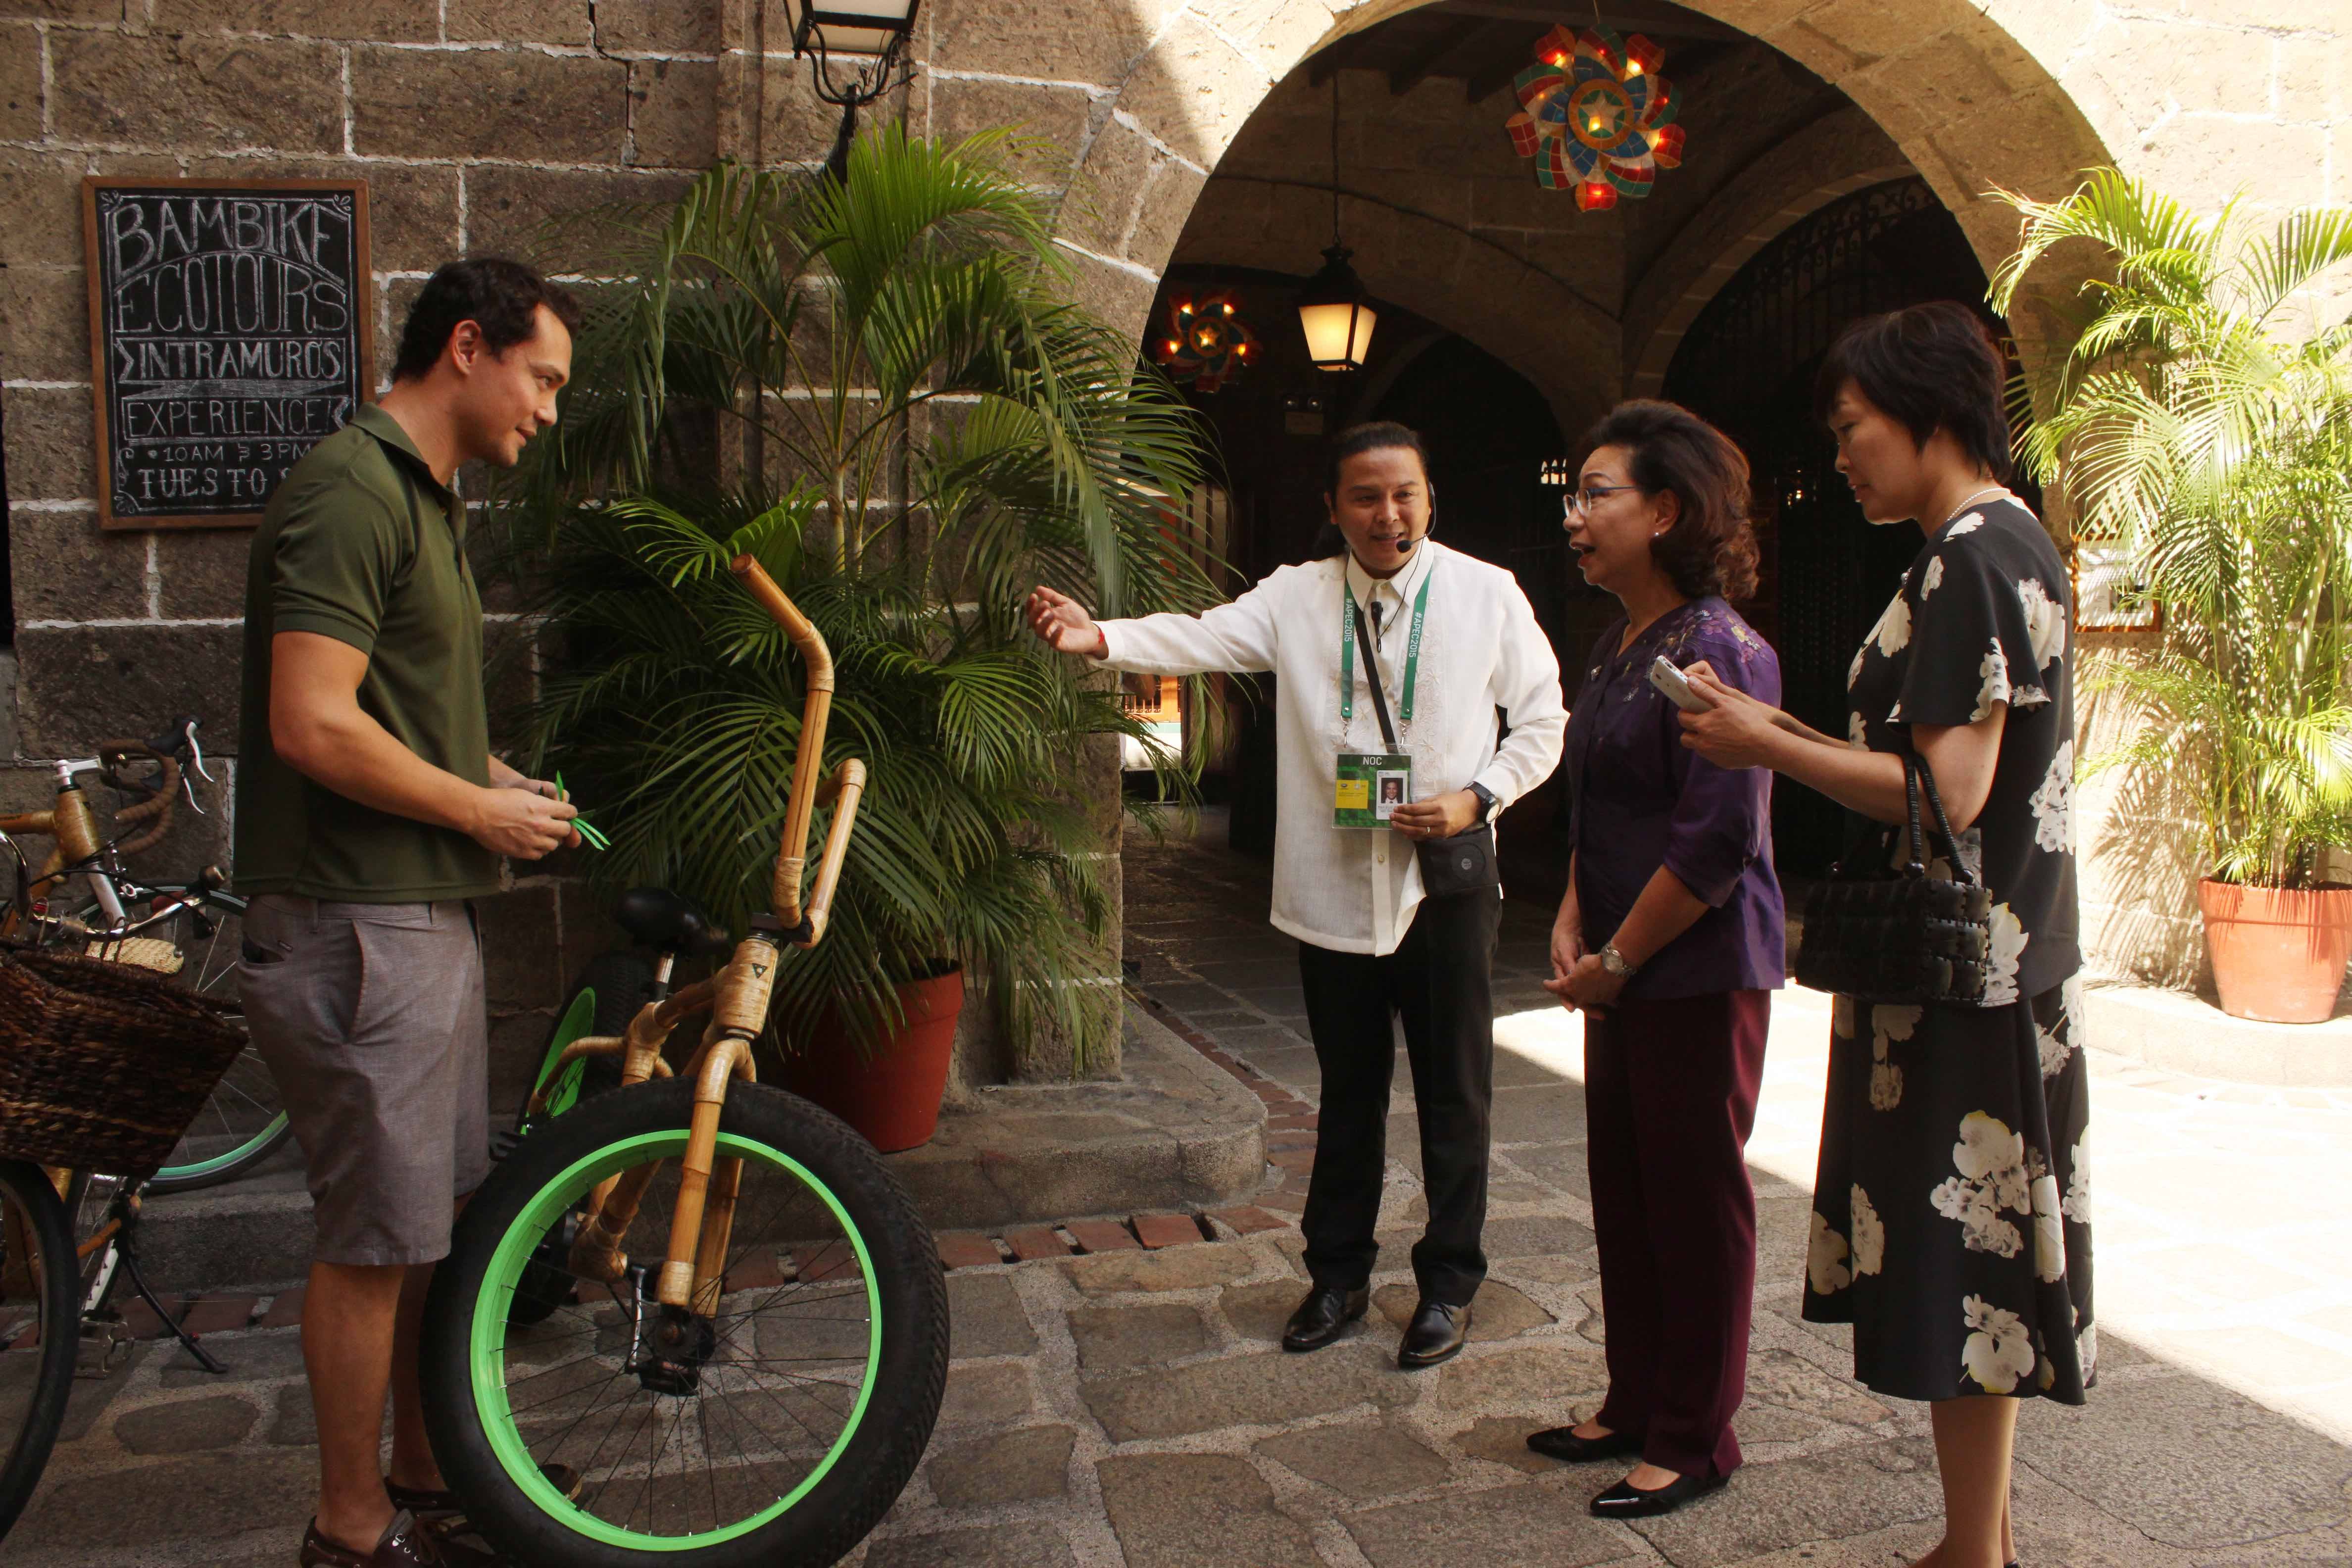 BAMBIKE. One of the attractions in Intramuros is the Bambike Ecotours, where guests can ride through the streets of the walled city on handmade bamboo bikes.